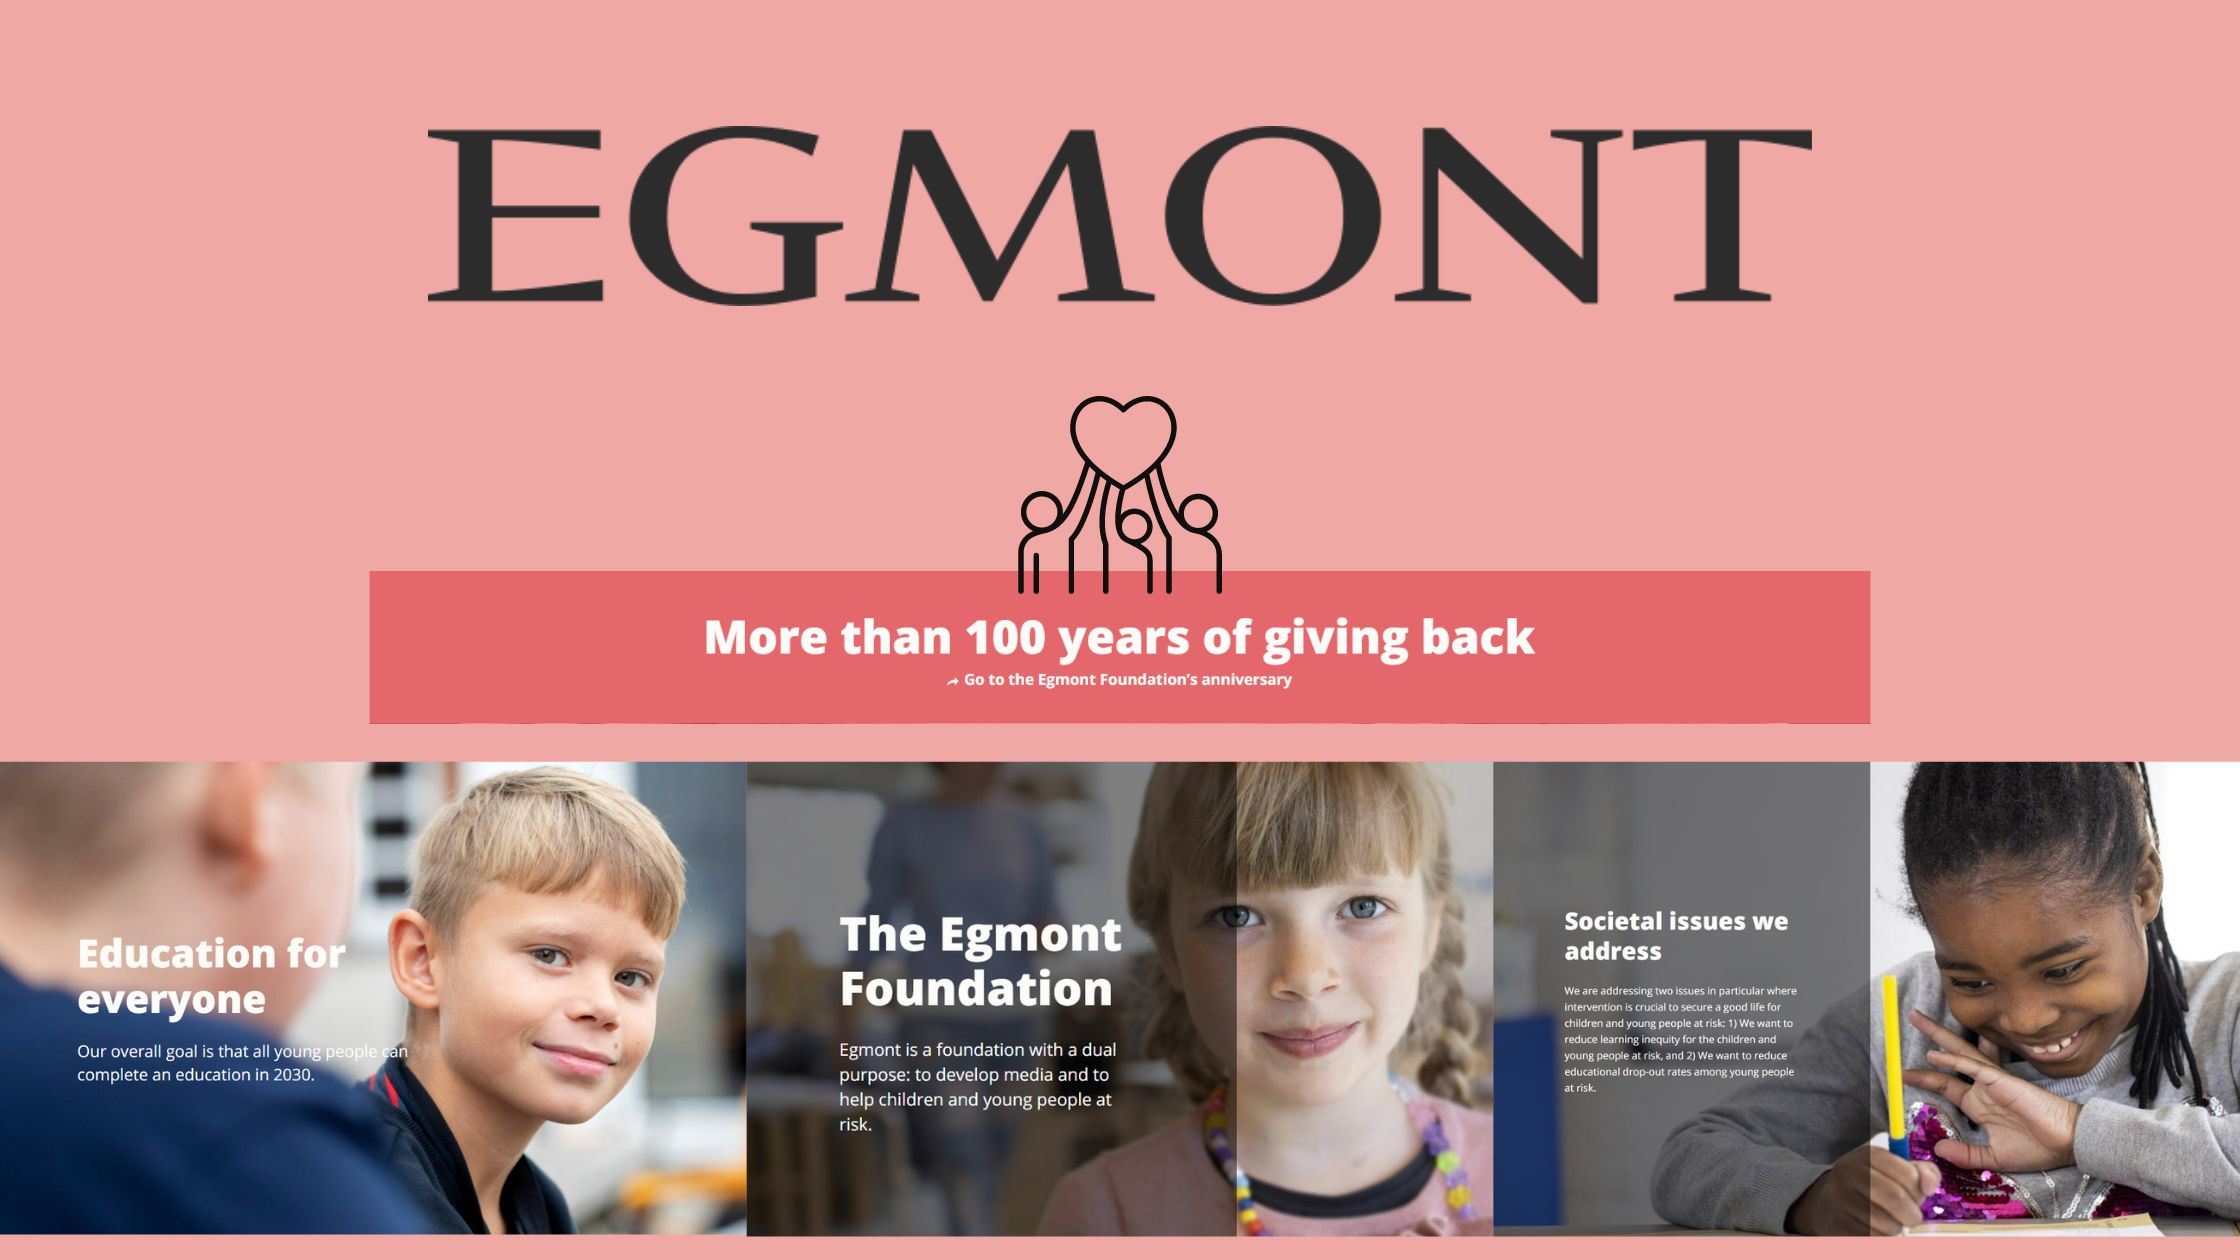 More than 100 years of giving back; The Charitable Work of the Egmont Foundation